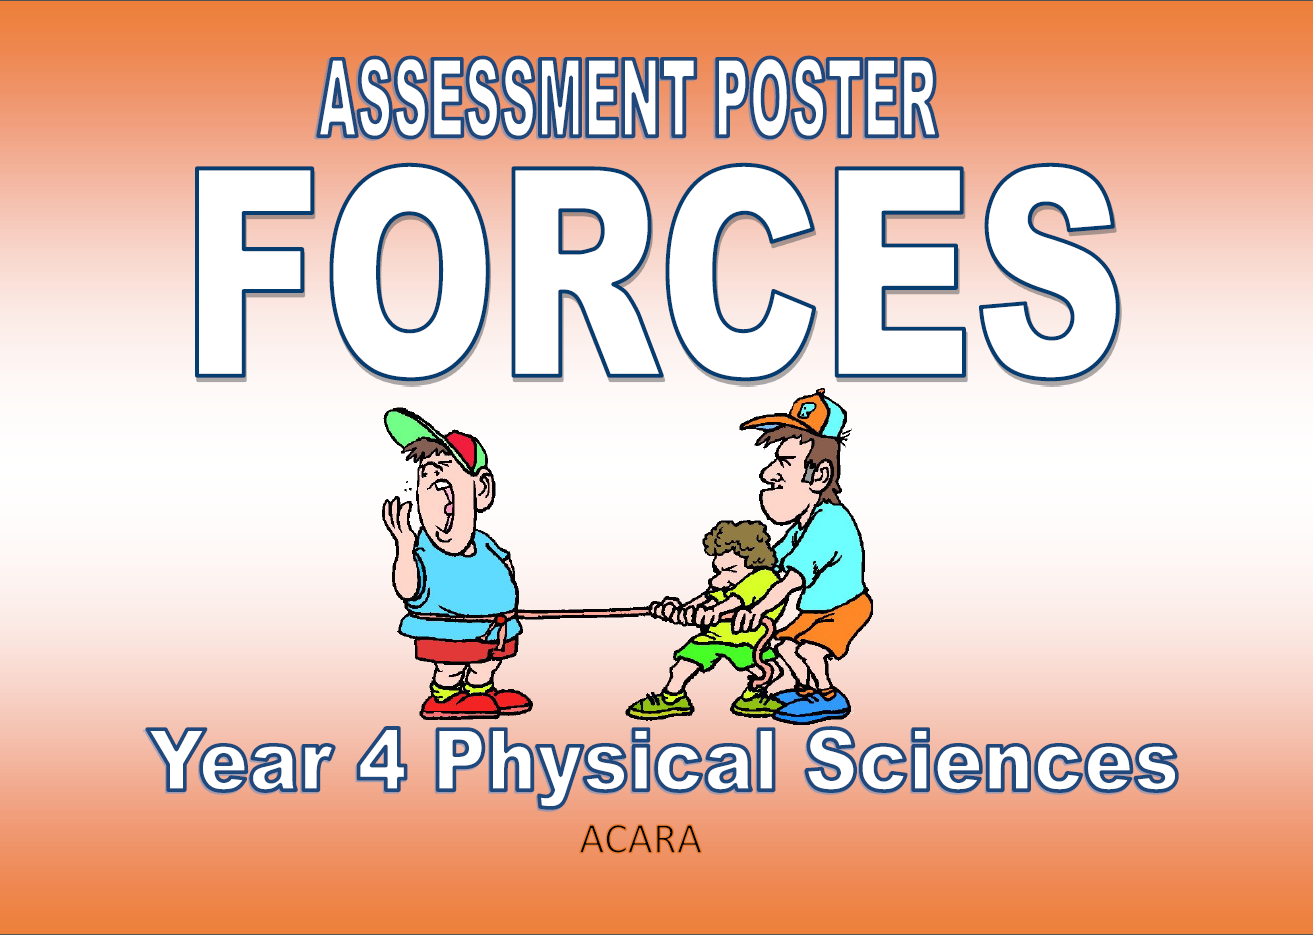 FORCES - ASSESSMENT POSTER